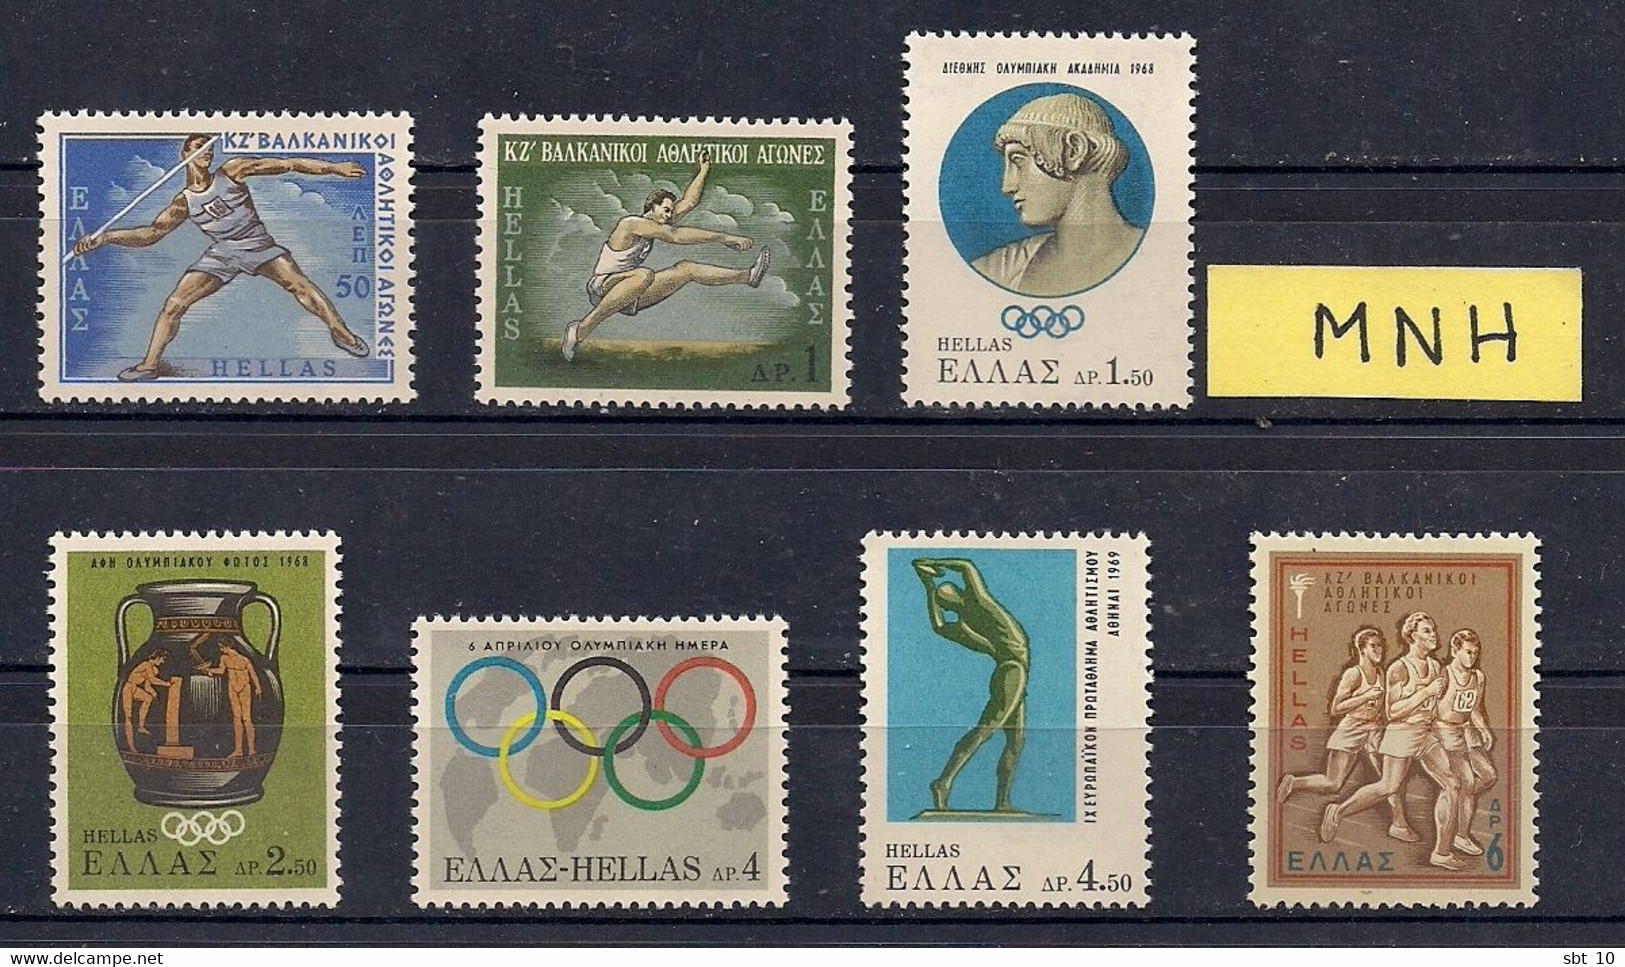 Greece - Lot stamps, sets Sports events,Olympic Games - MNH - MH (10 Foto)